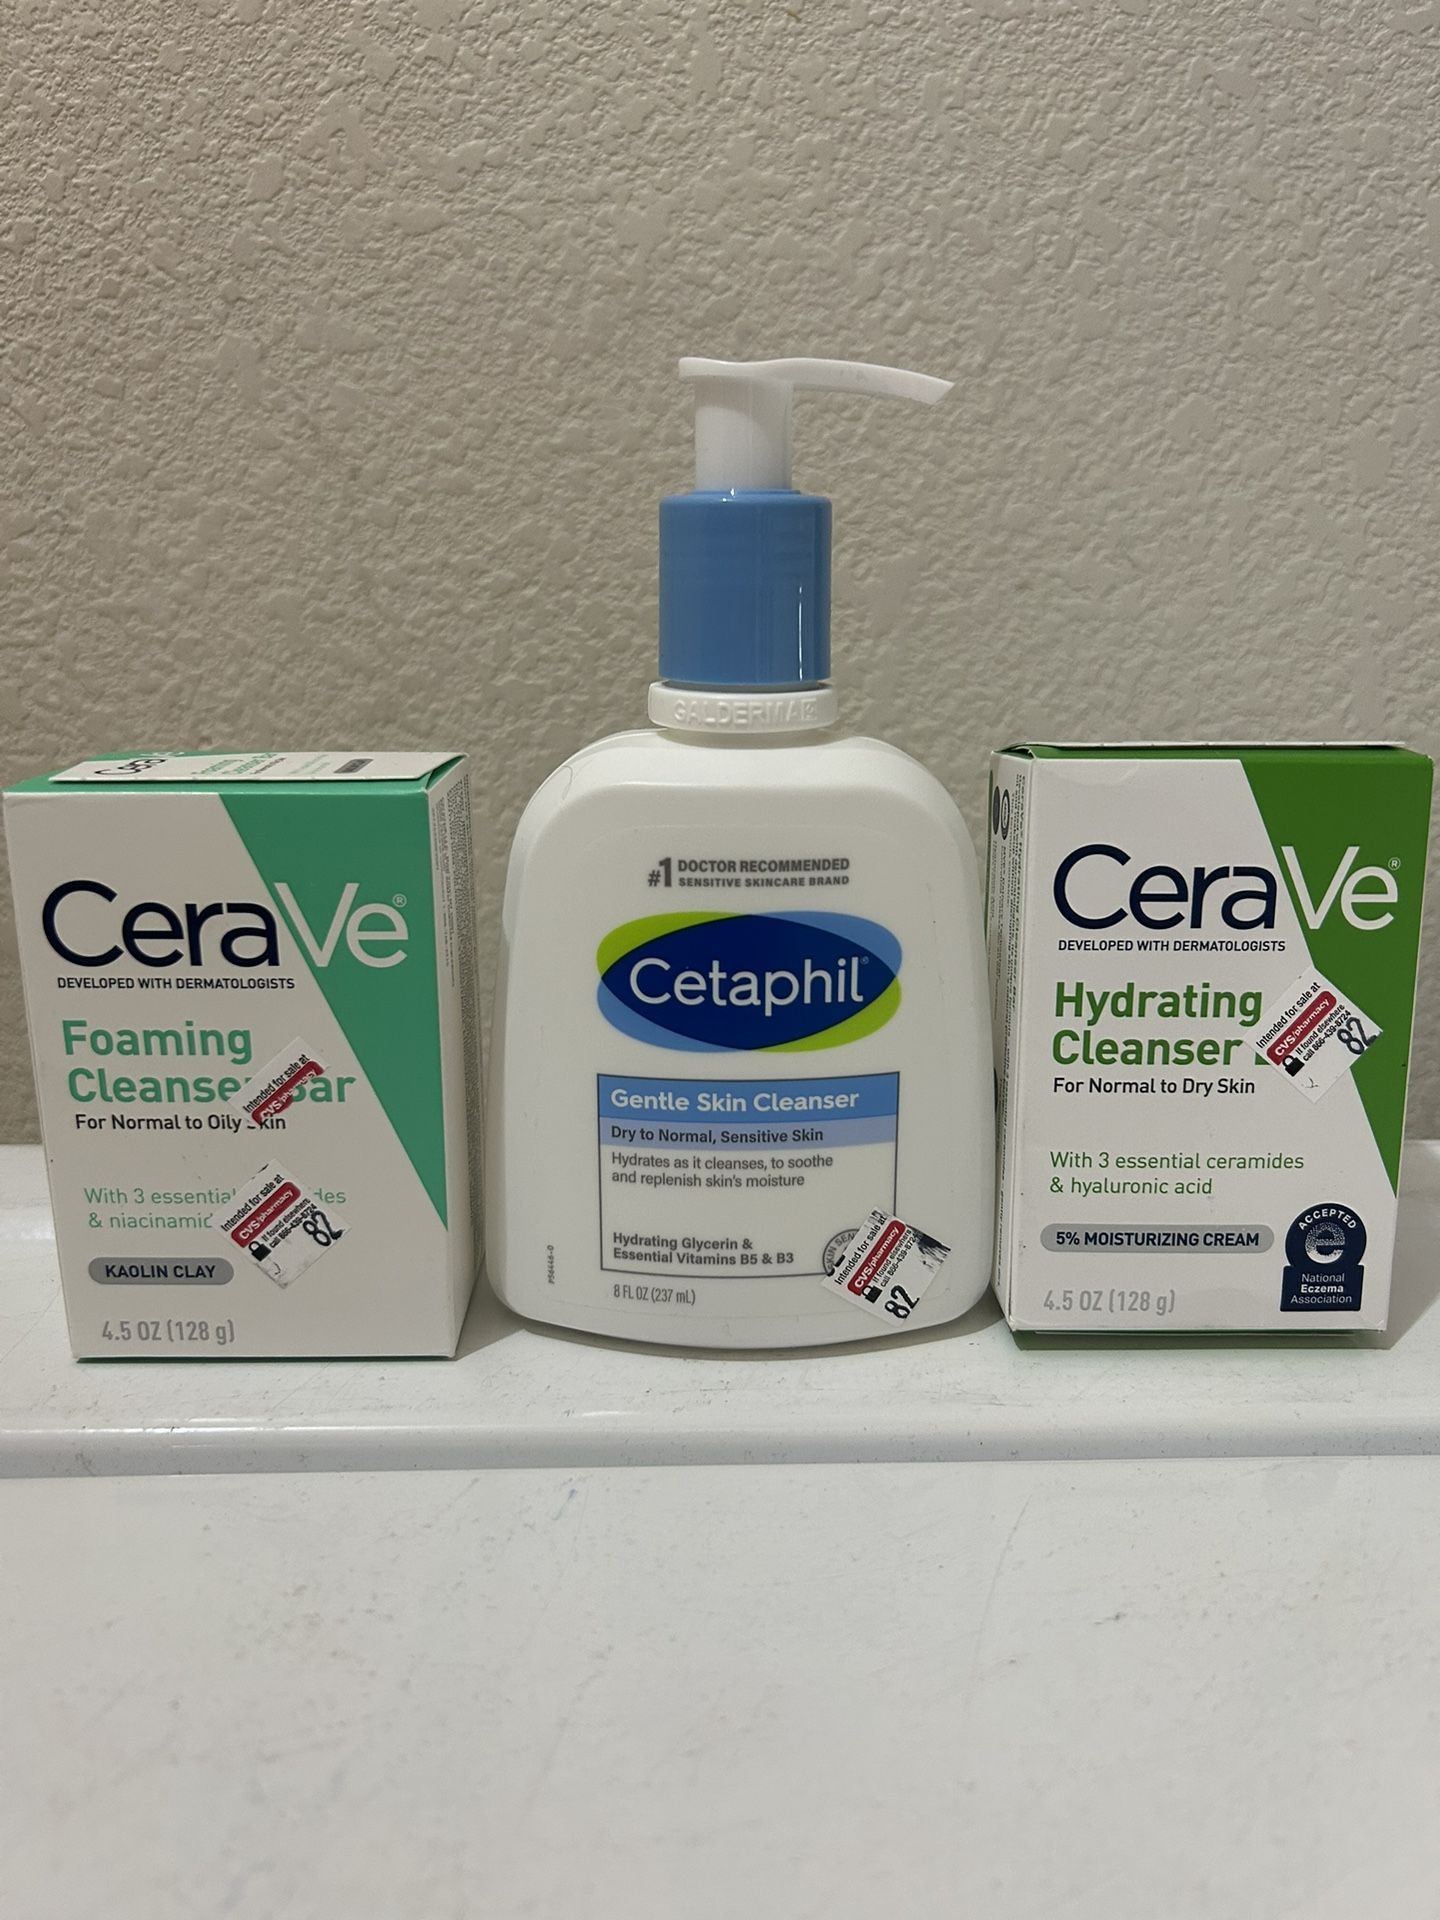 Cethaphil Cleanser And Cerave Facial Bar (everything $17)